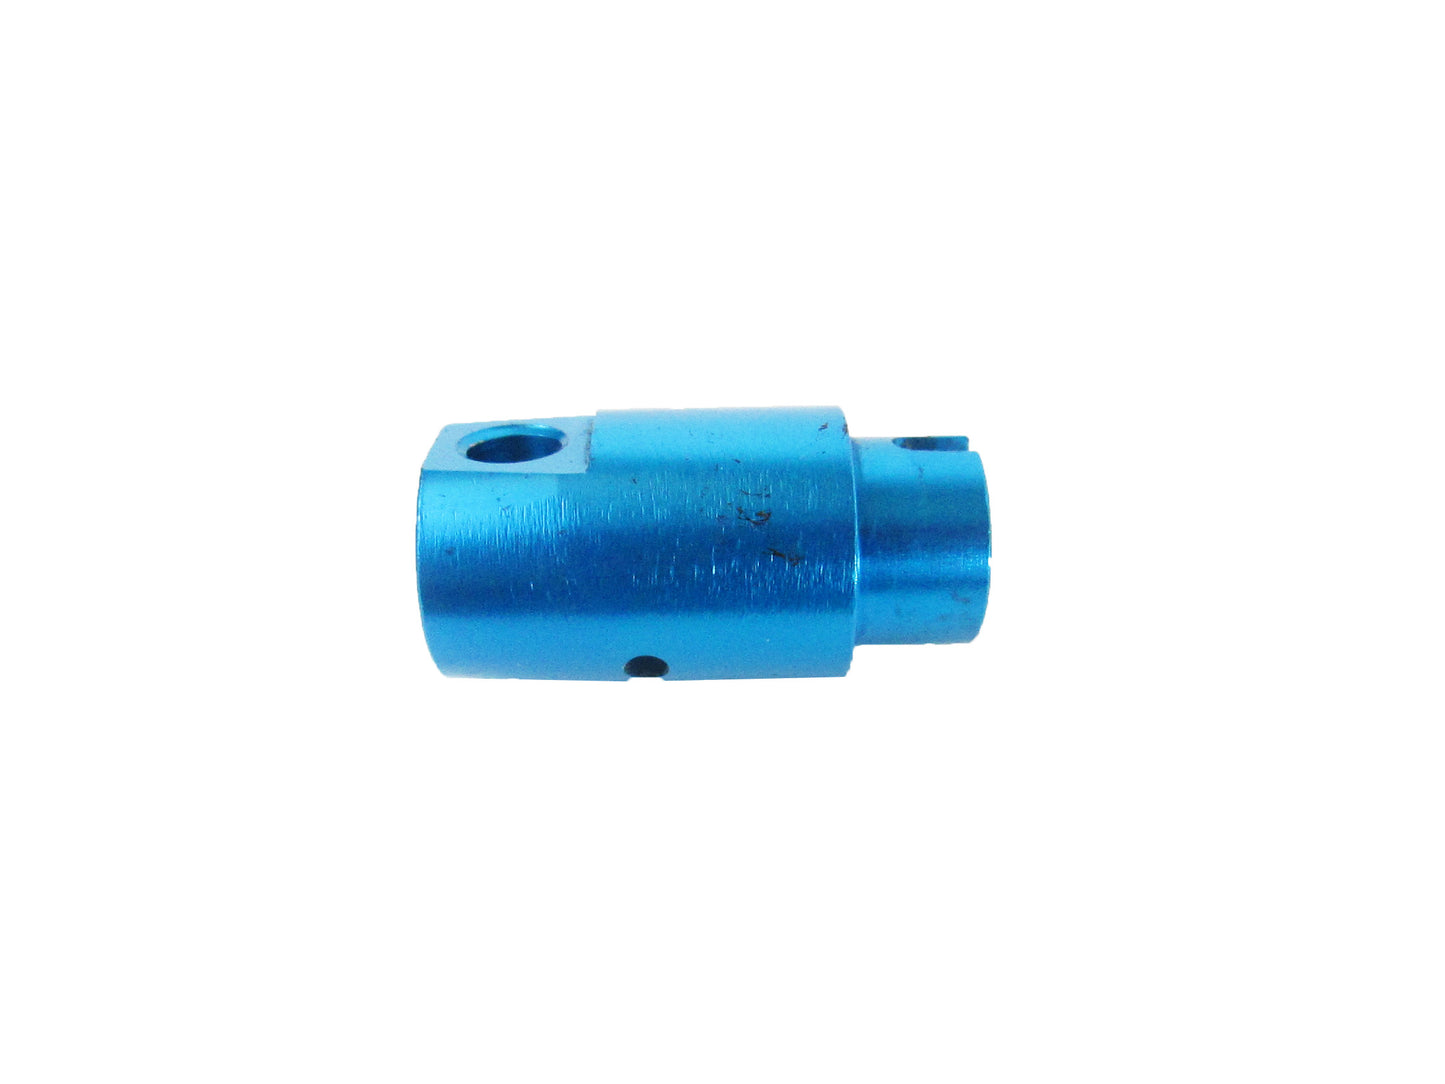 Full Metal SVD Hop Up Replacement - Blue